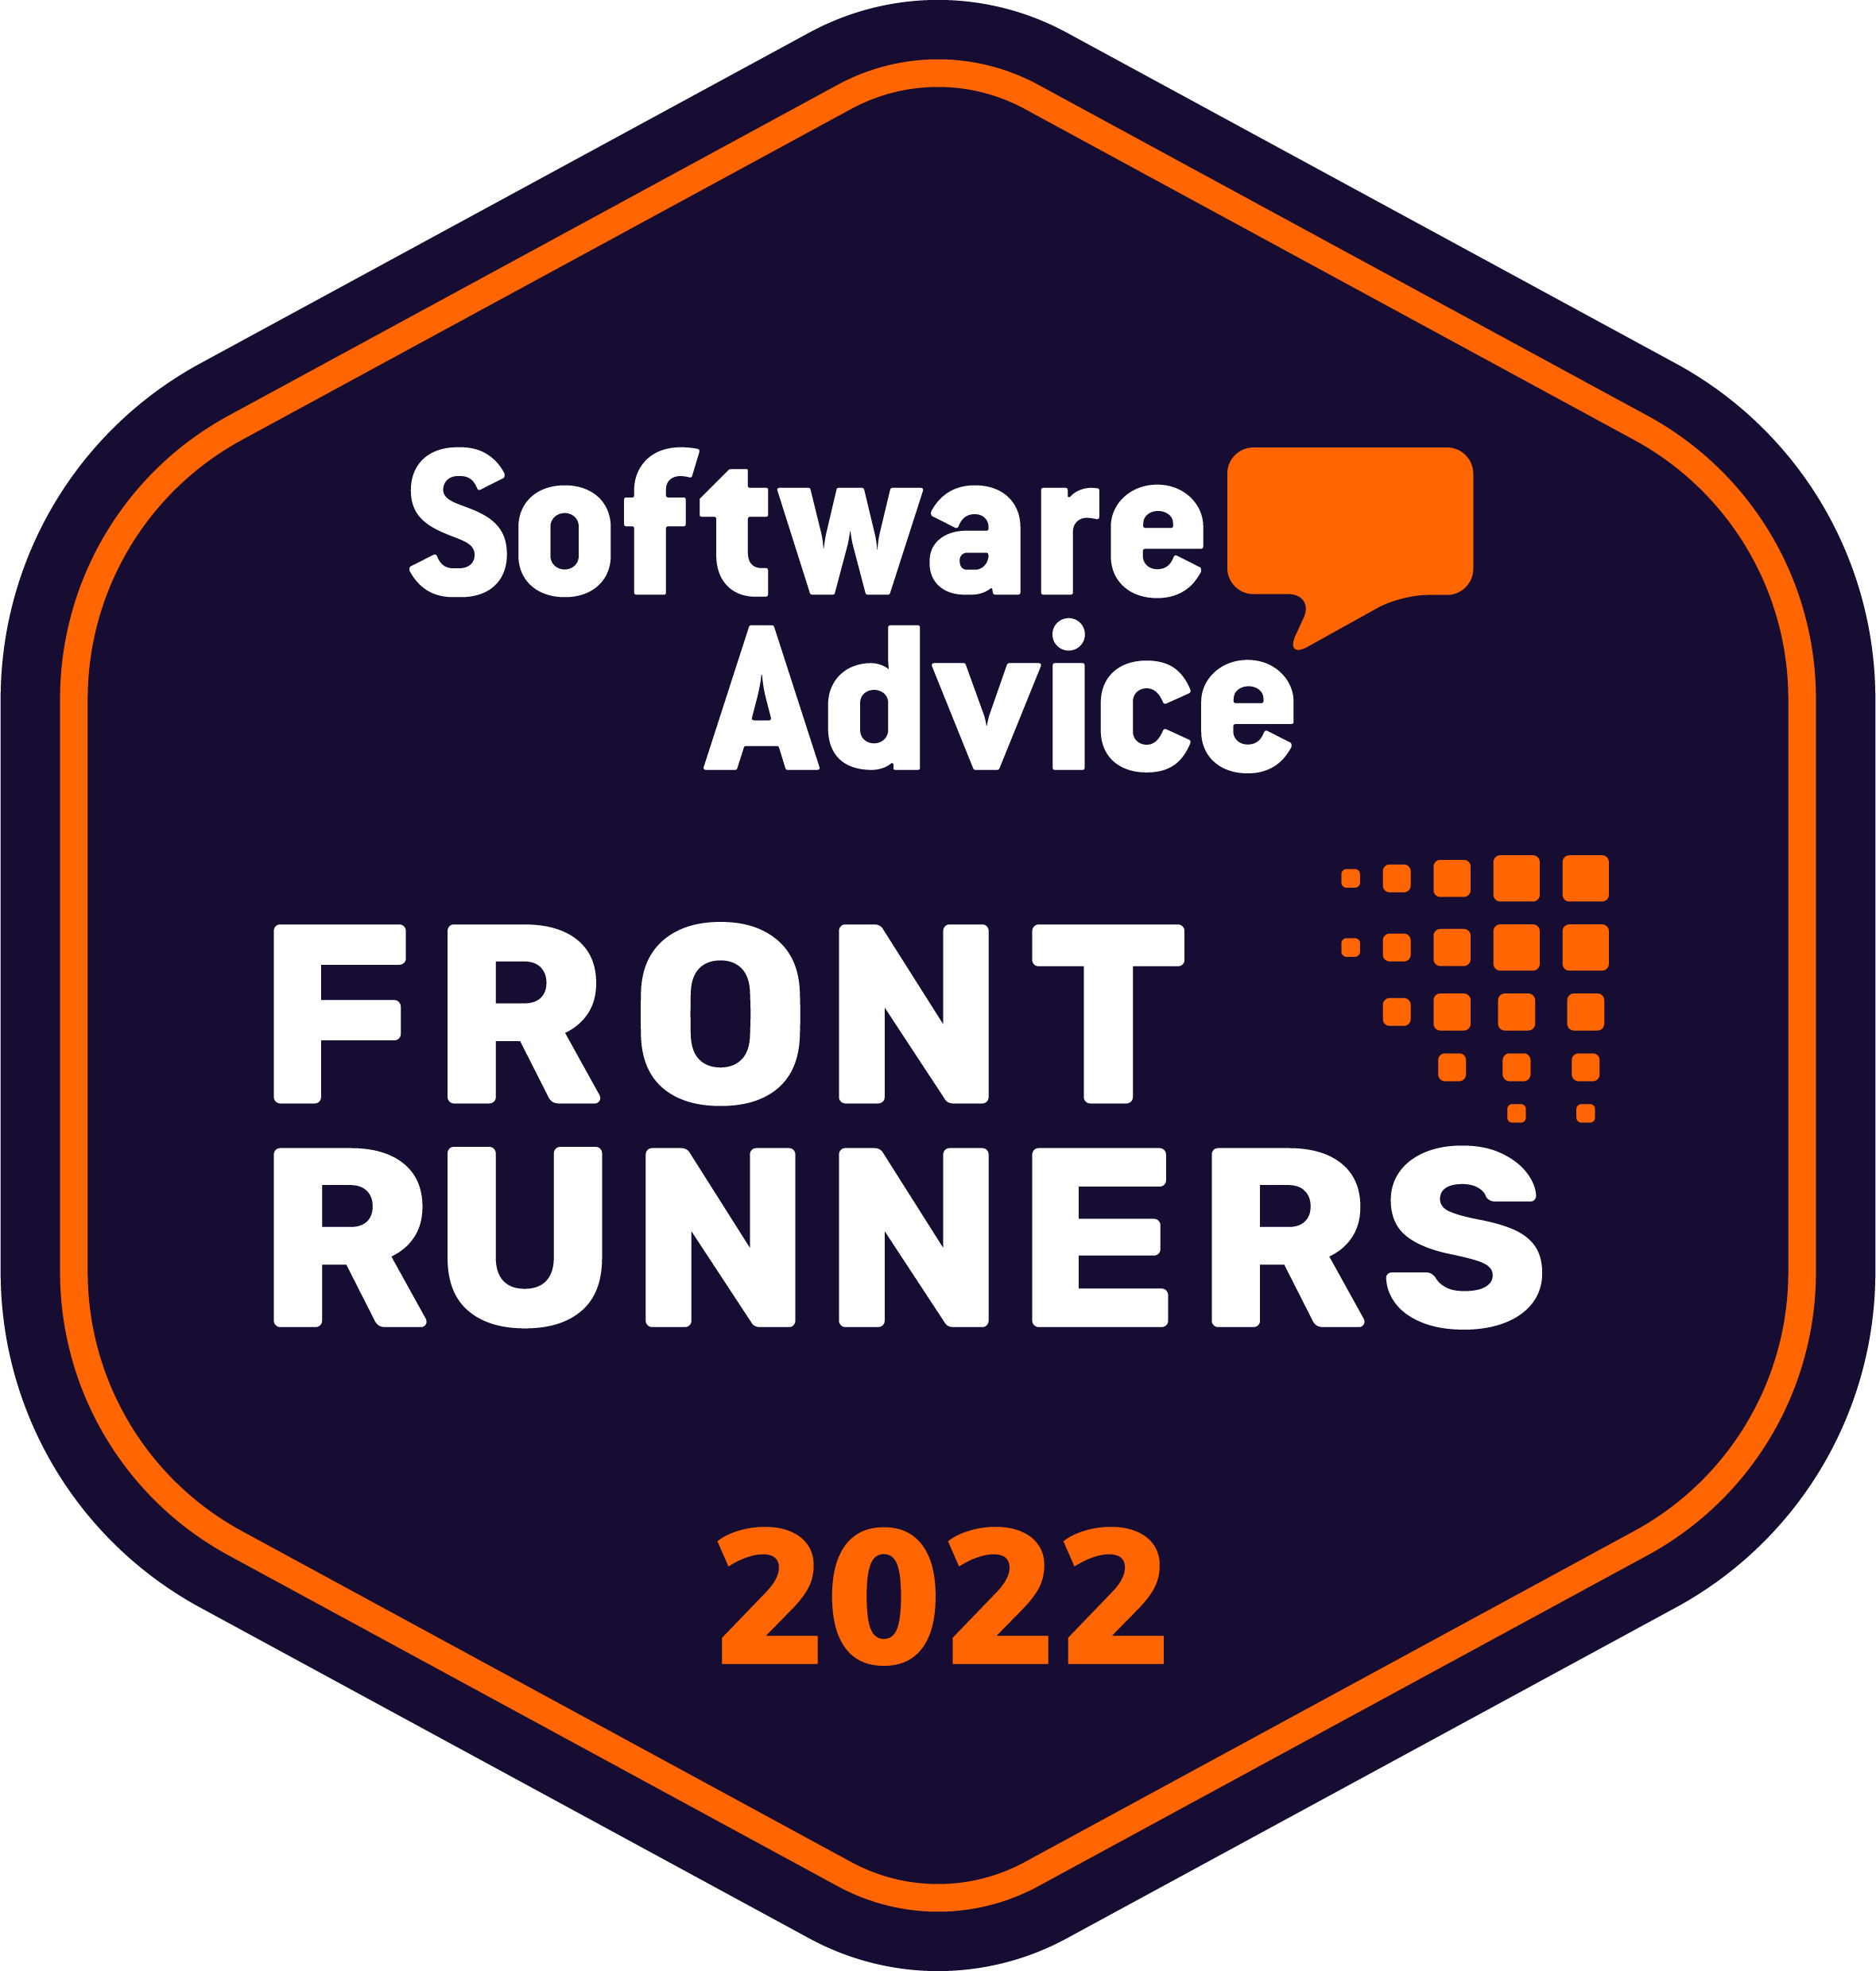 IT Management Software Top Performers 2022 Q1